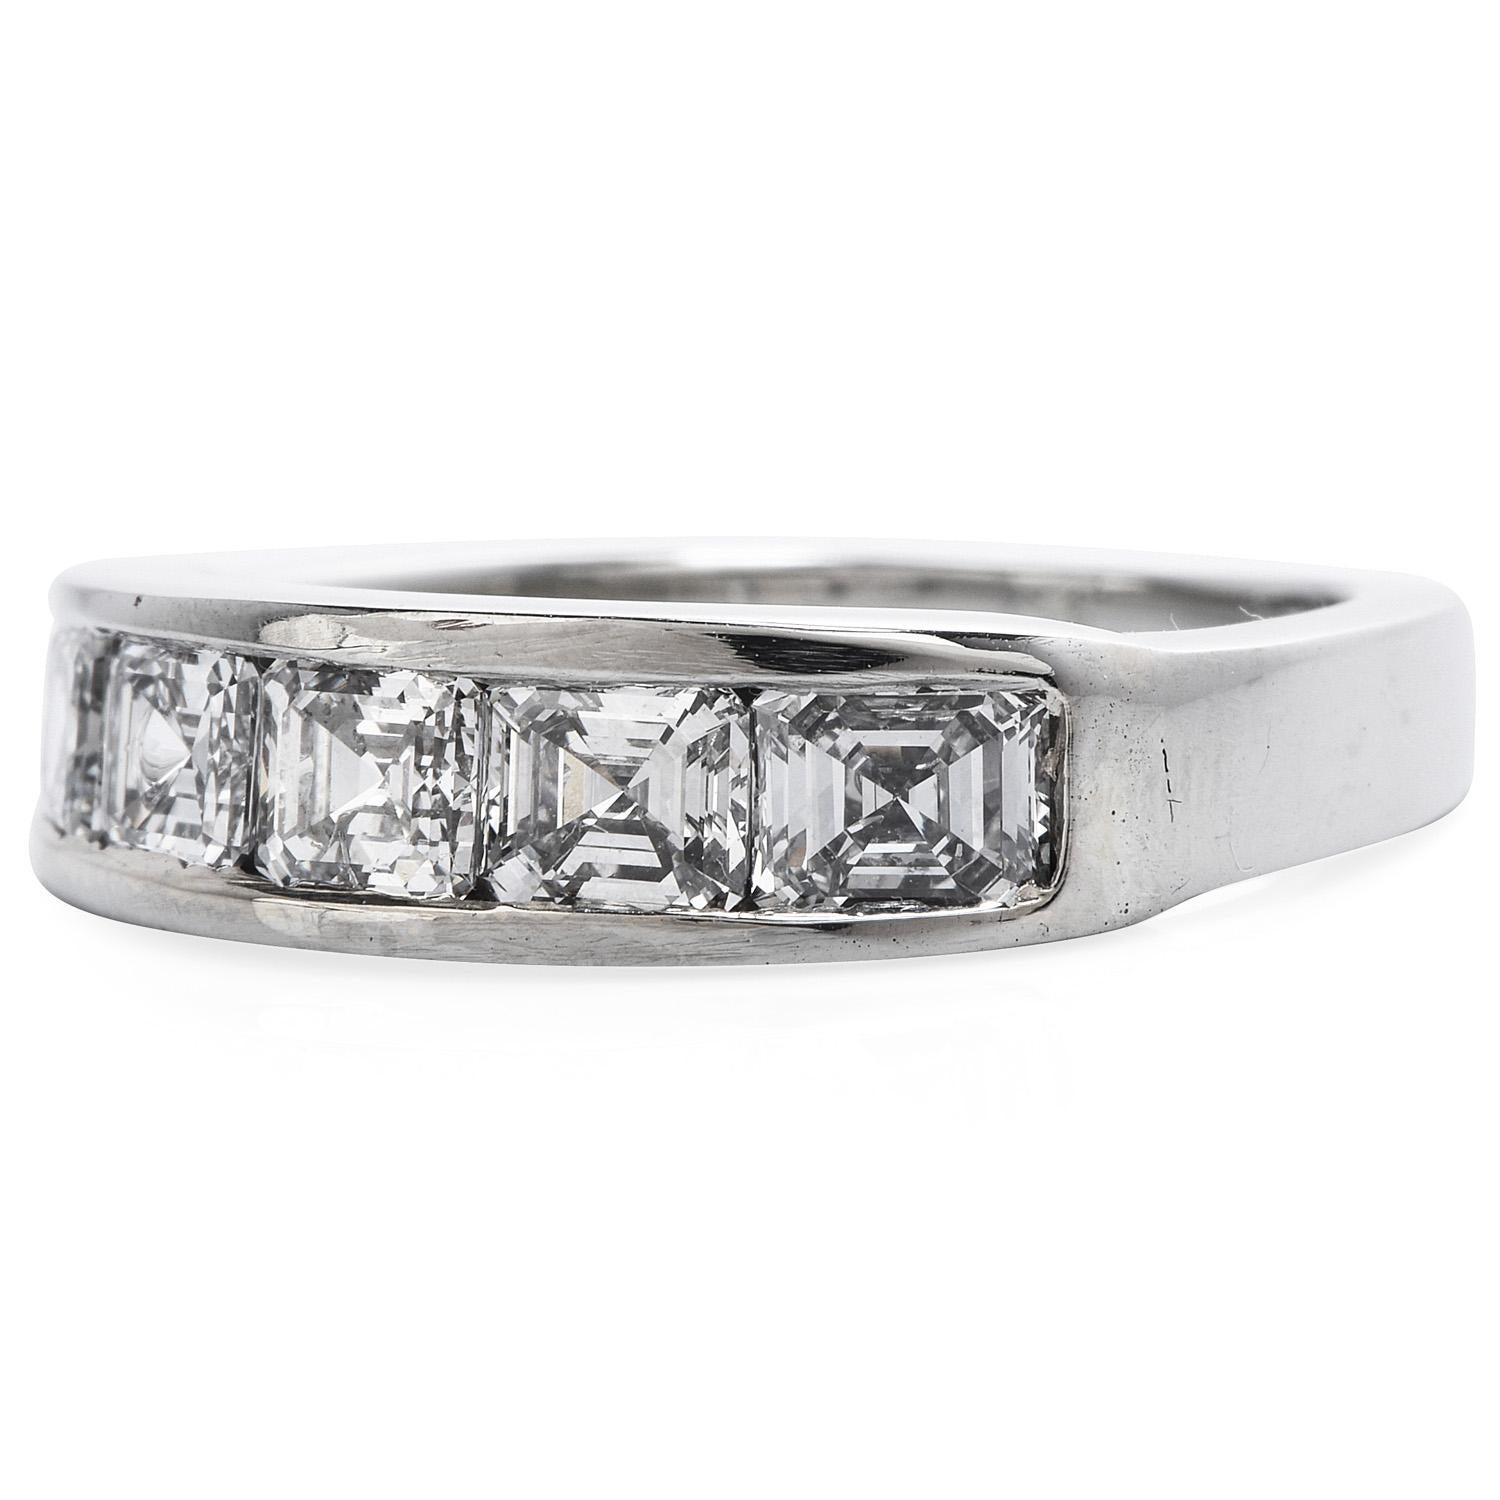 High Quality Near Colorless Diamonds, for a magnificent wedding band ring, 

Crafted in solid Platinum, the center is adorned by 6 GIA certified Square Emerald cut- Asscher cut, Channel set, Diamonds, weighing approximately 1.59 carats, (D-G color